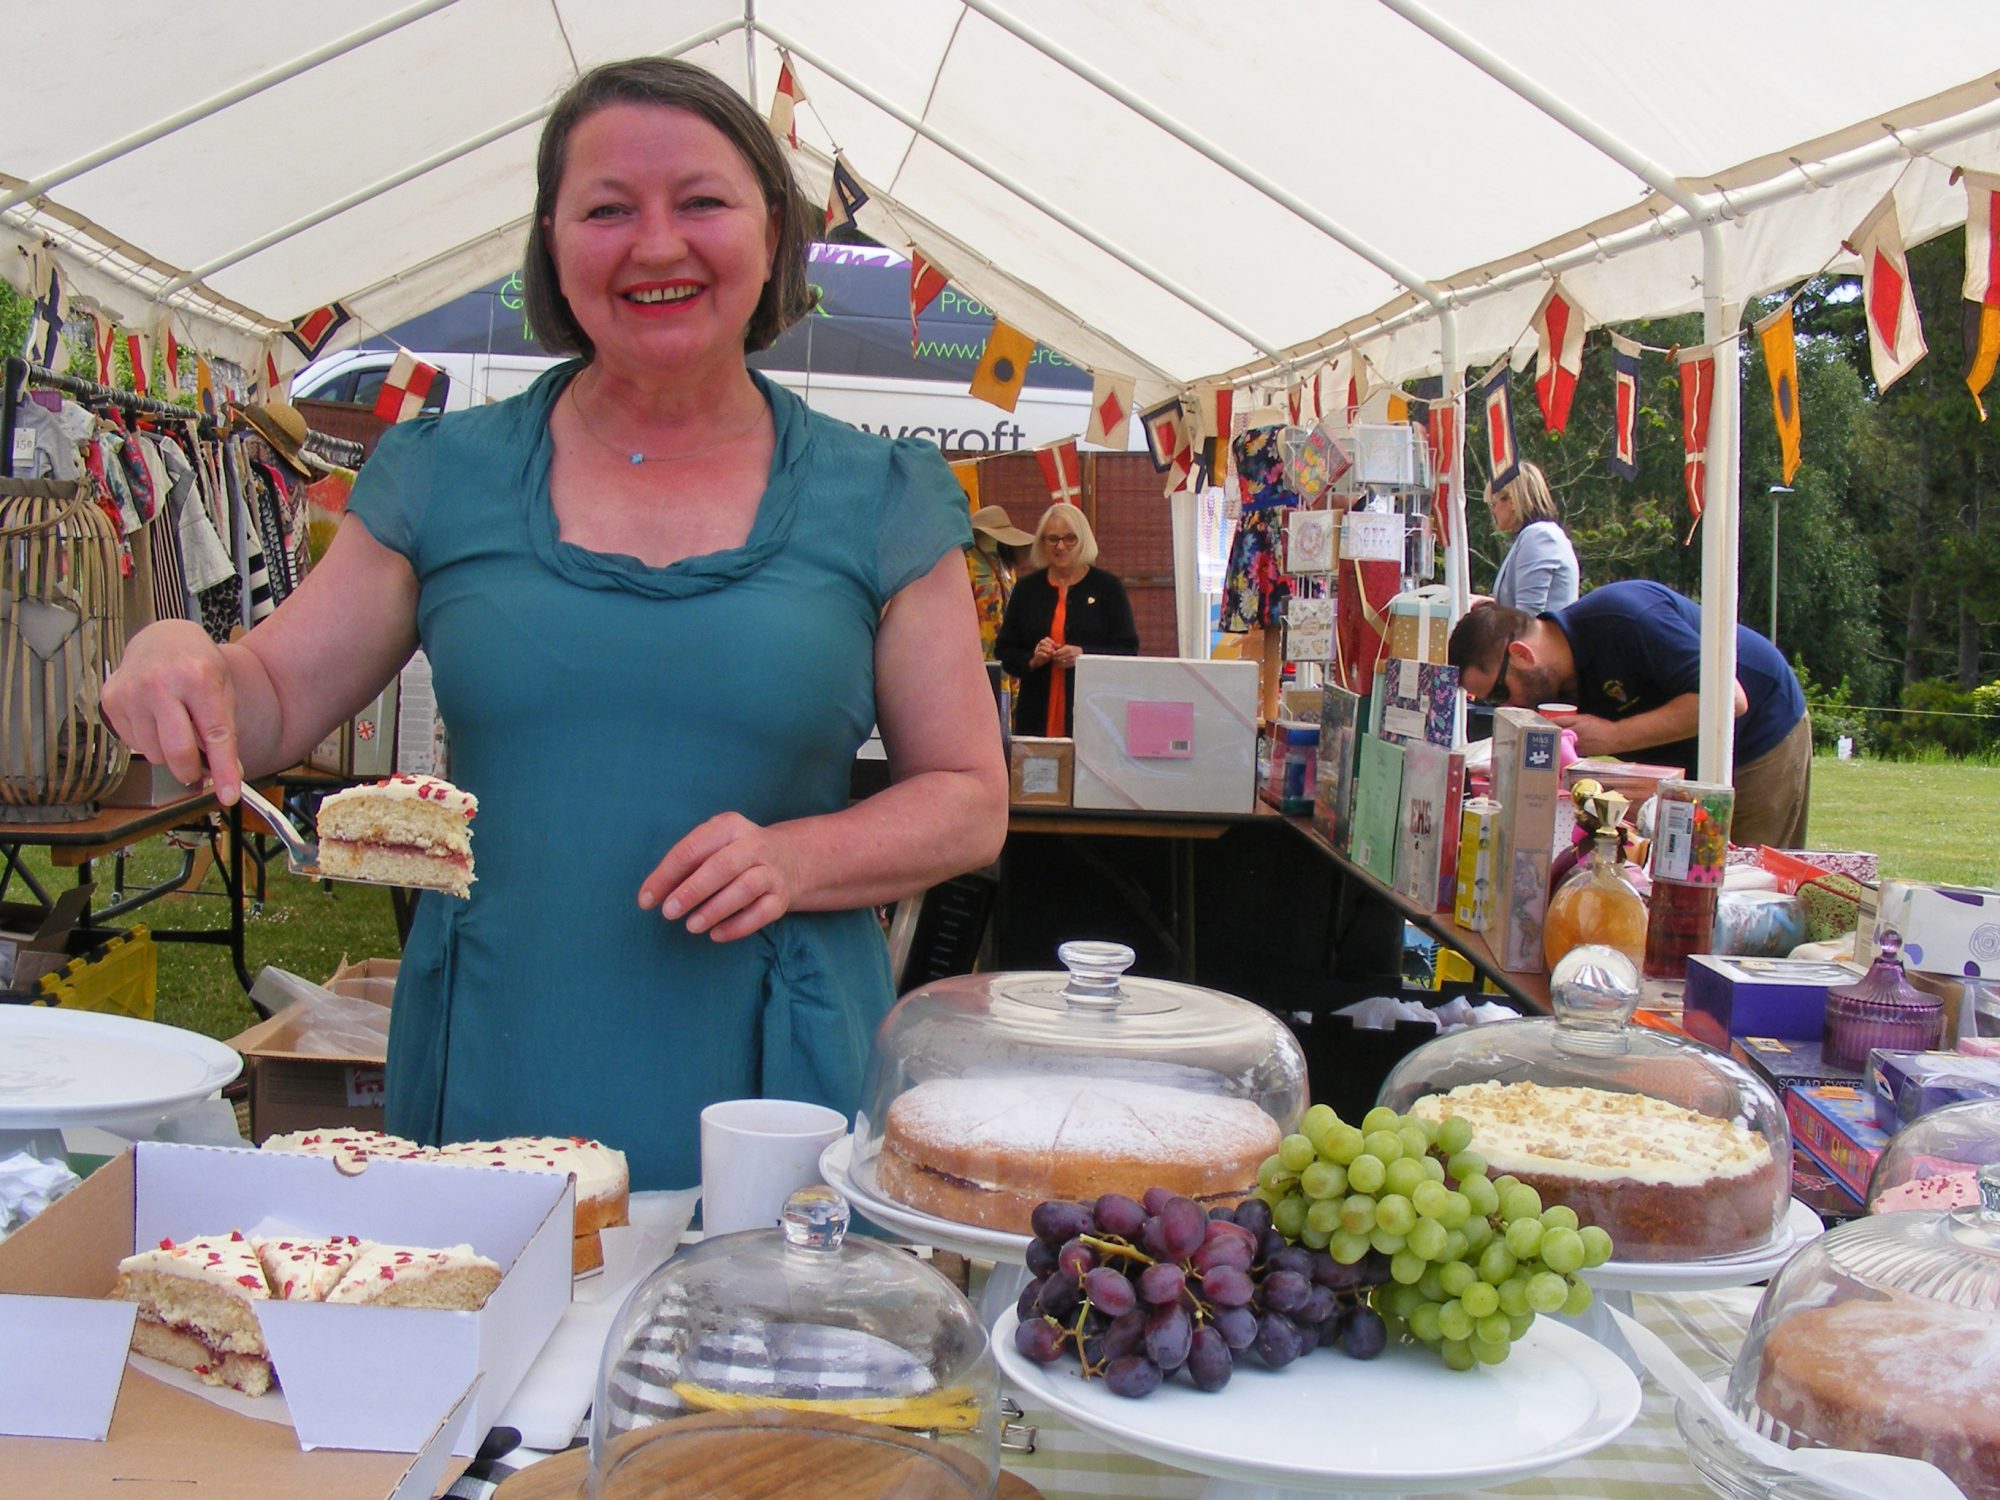 Volunteer serves slices of cake at Rowcrofts garden party.